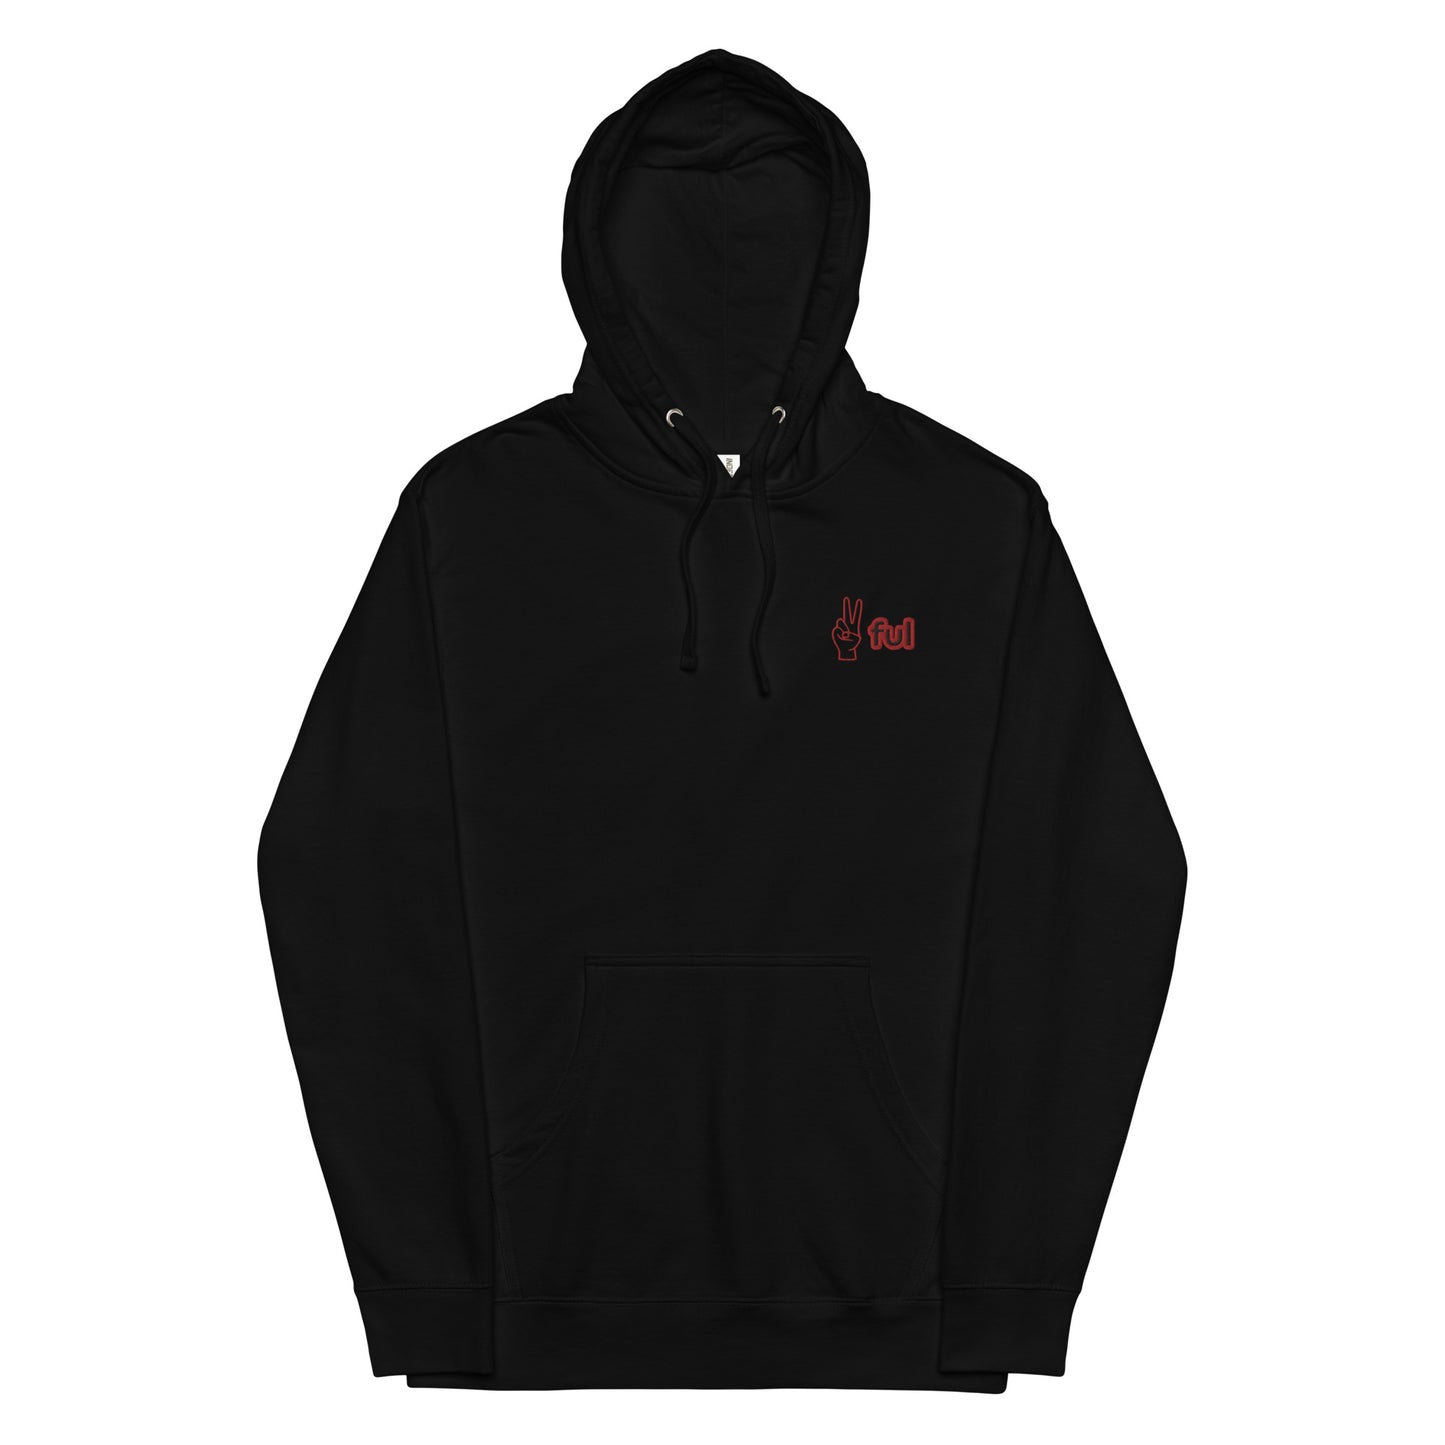 Peaceful Midweight hoodie S-2XL